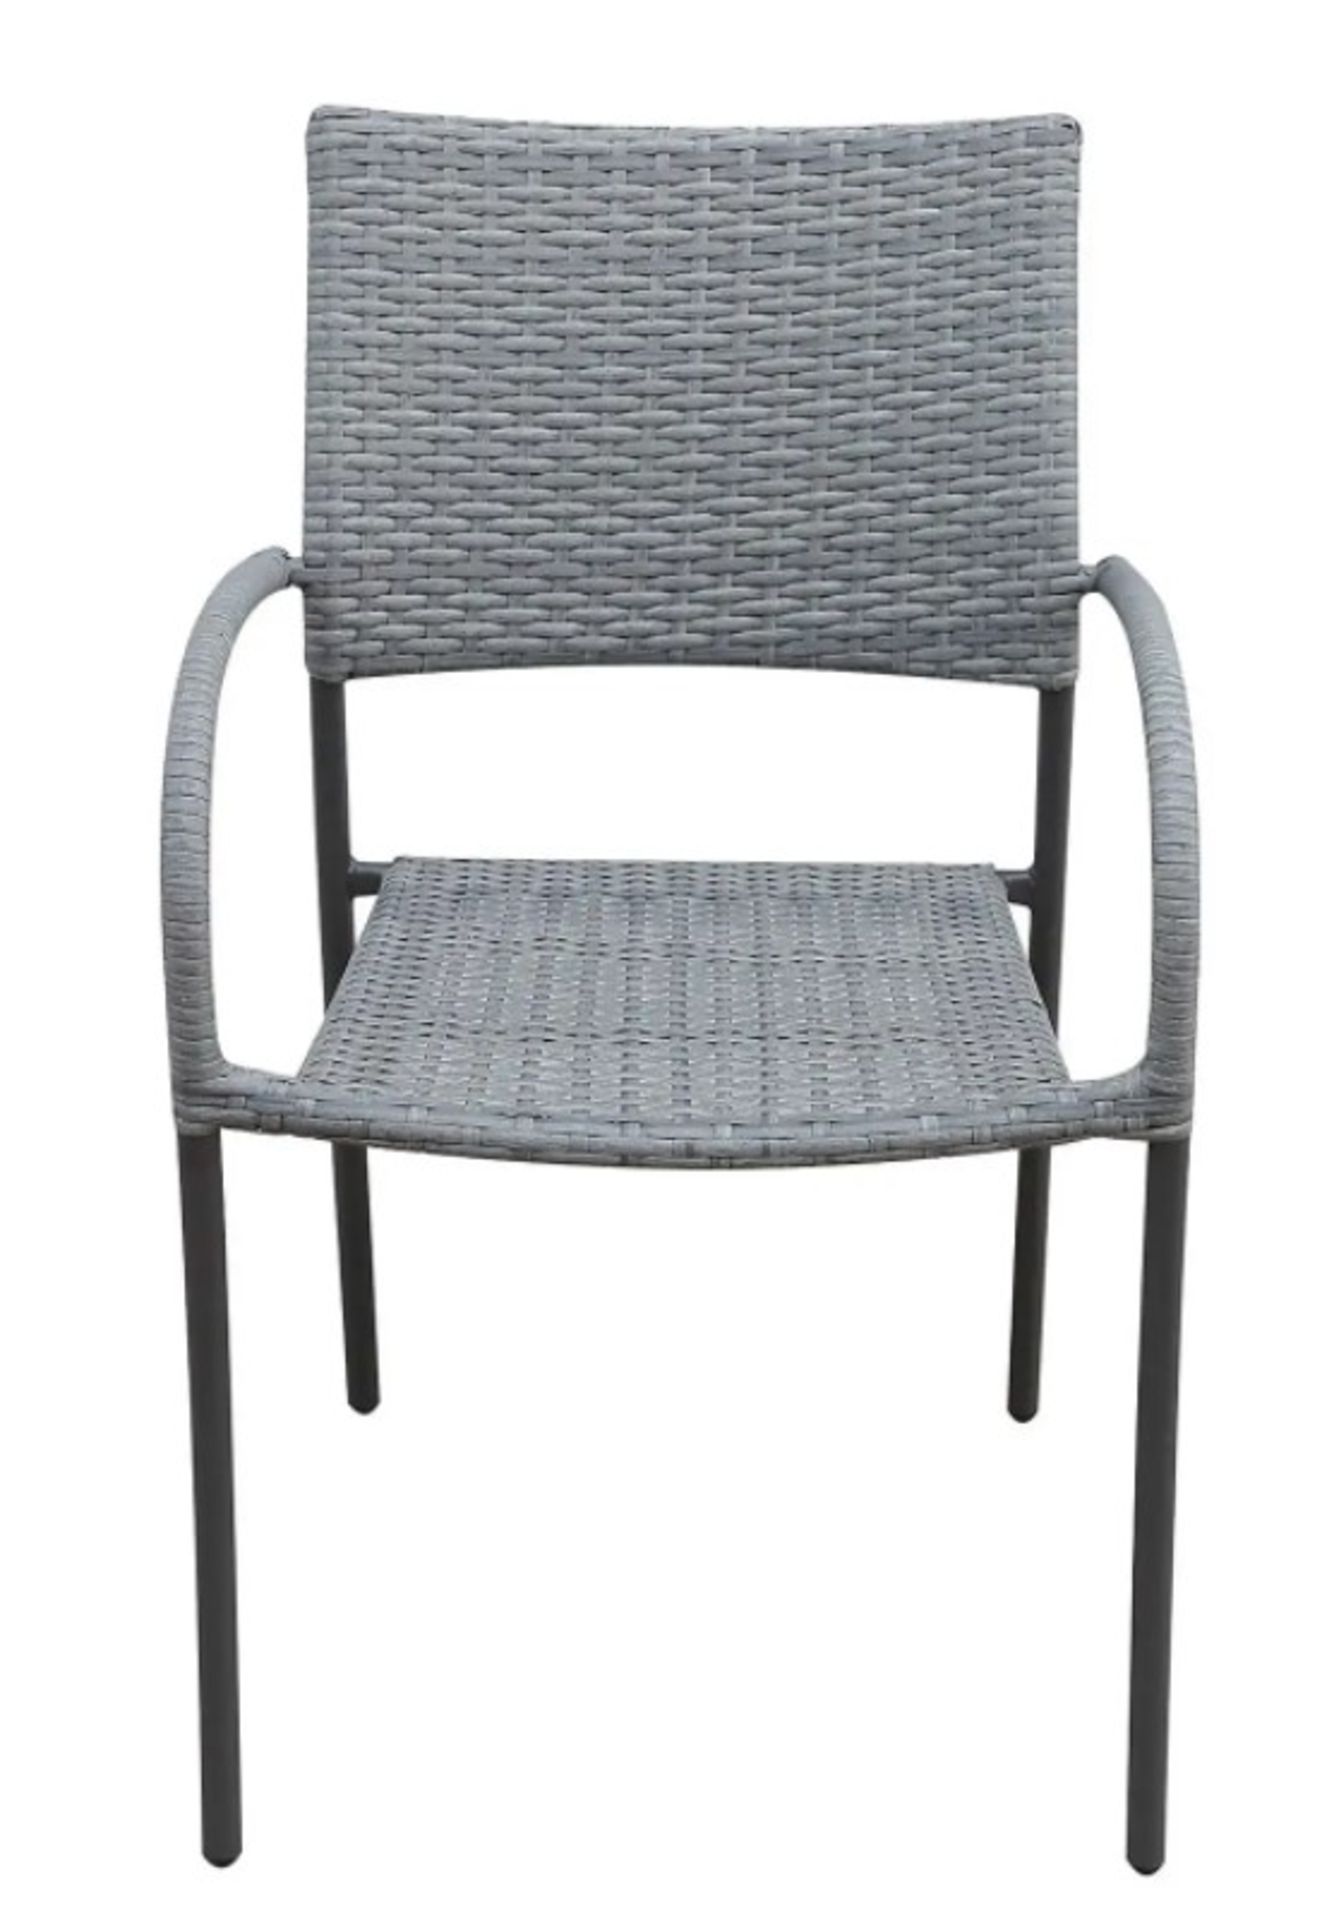 (60/5F) 6x Bambrick Stacking Chair Grey. (All Units Appears As New).